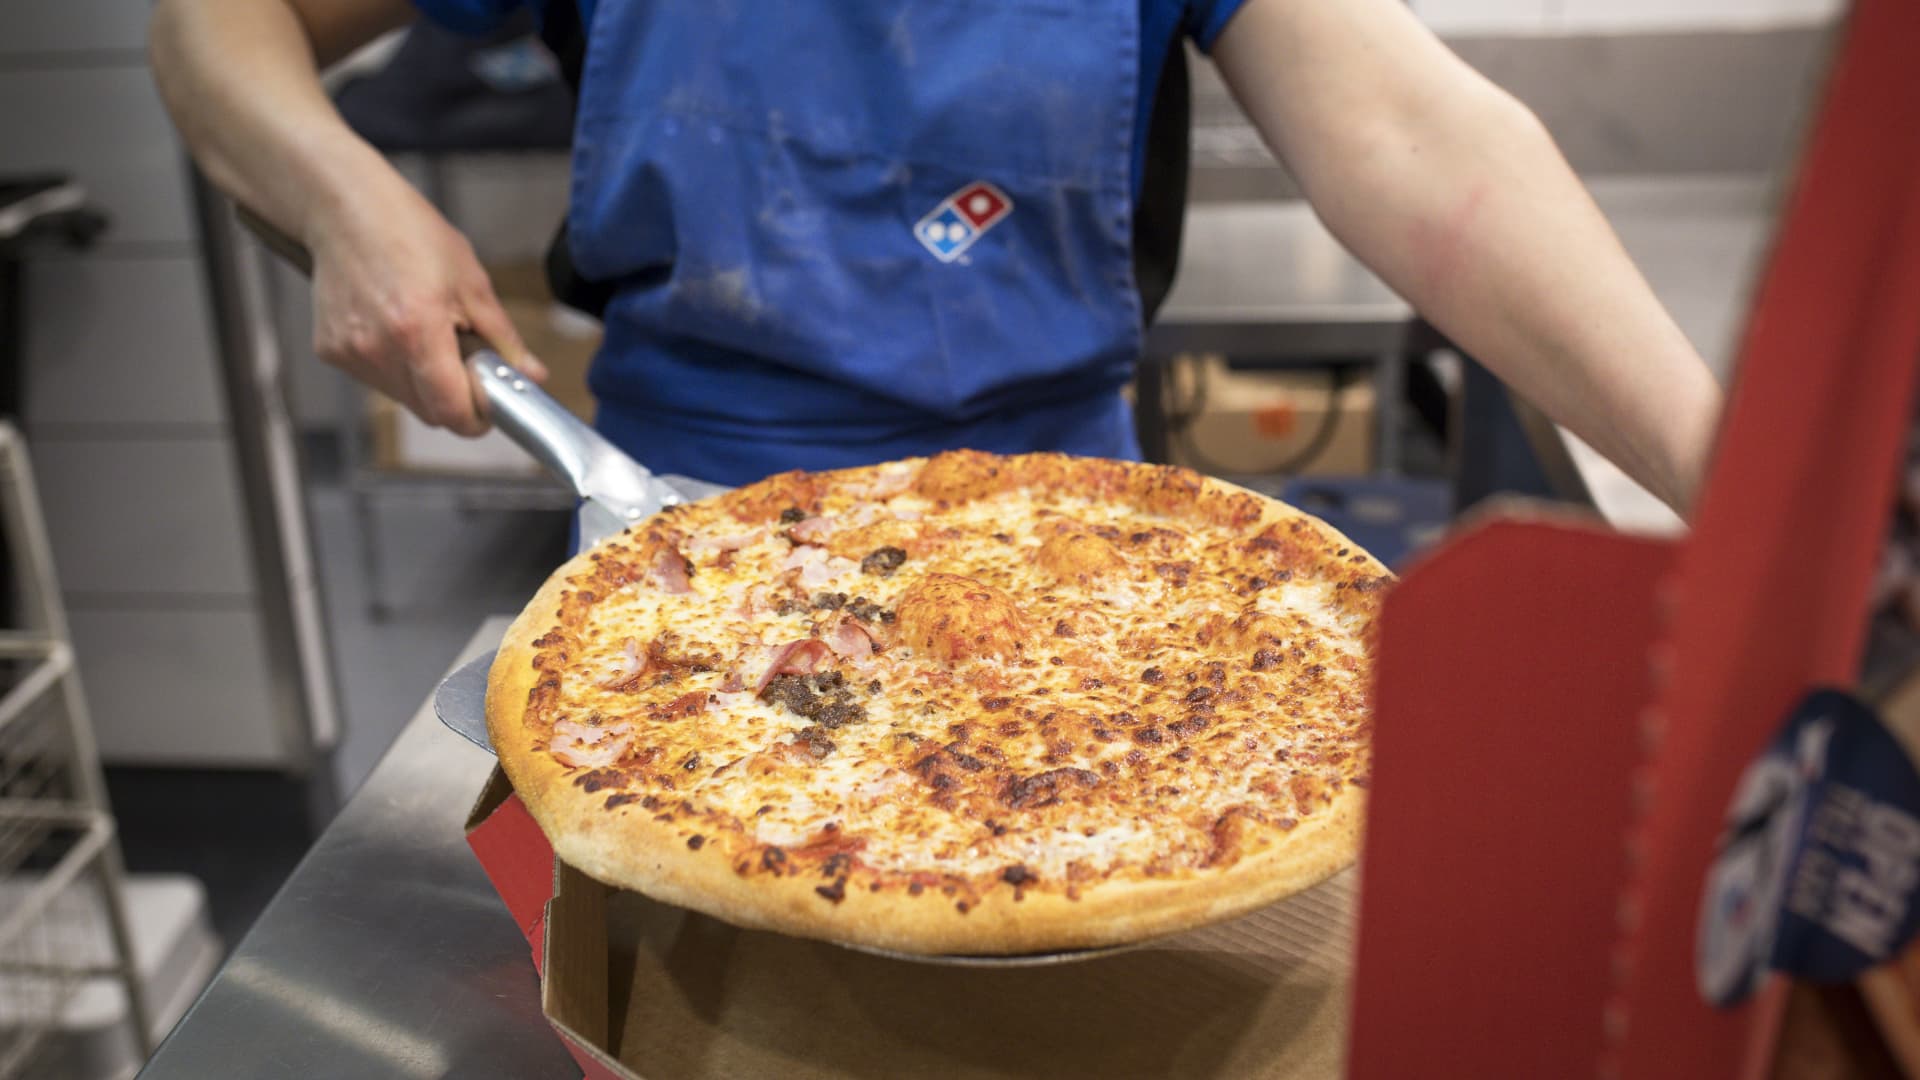 Domino’s earnings leave out expectations as pizza chain struggles with driver shortage, elevated costs